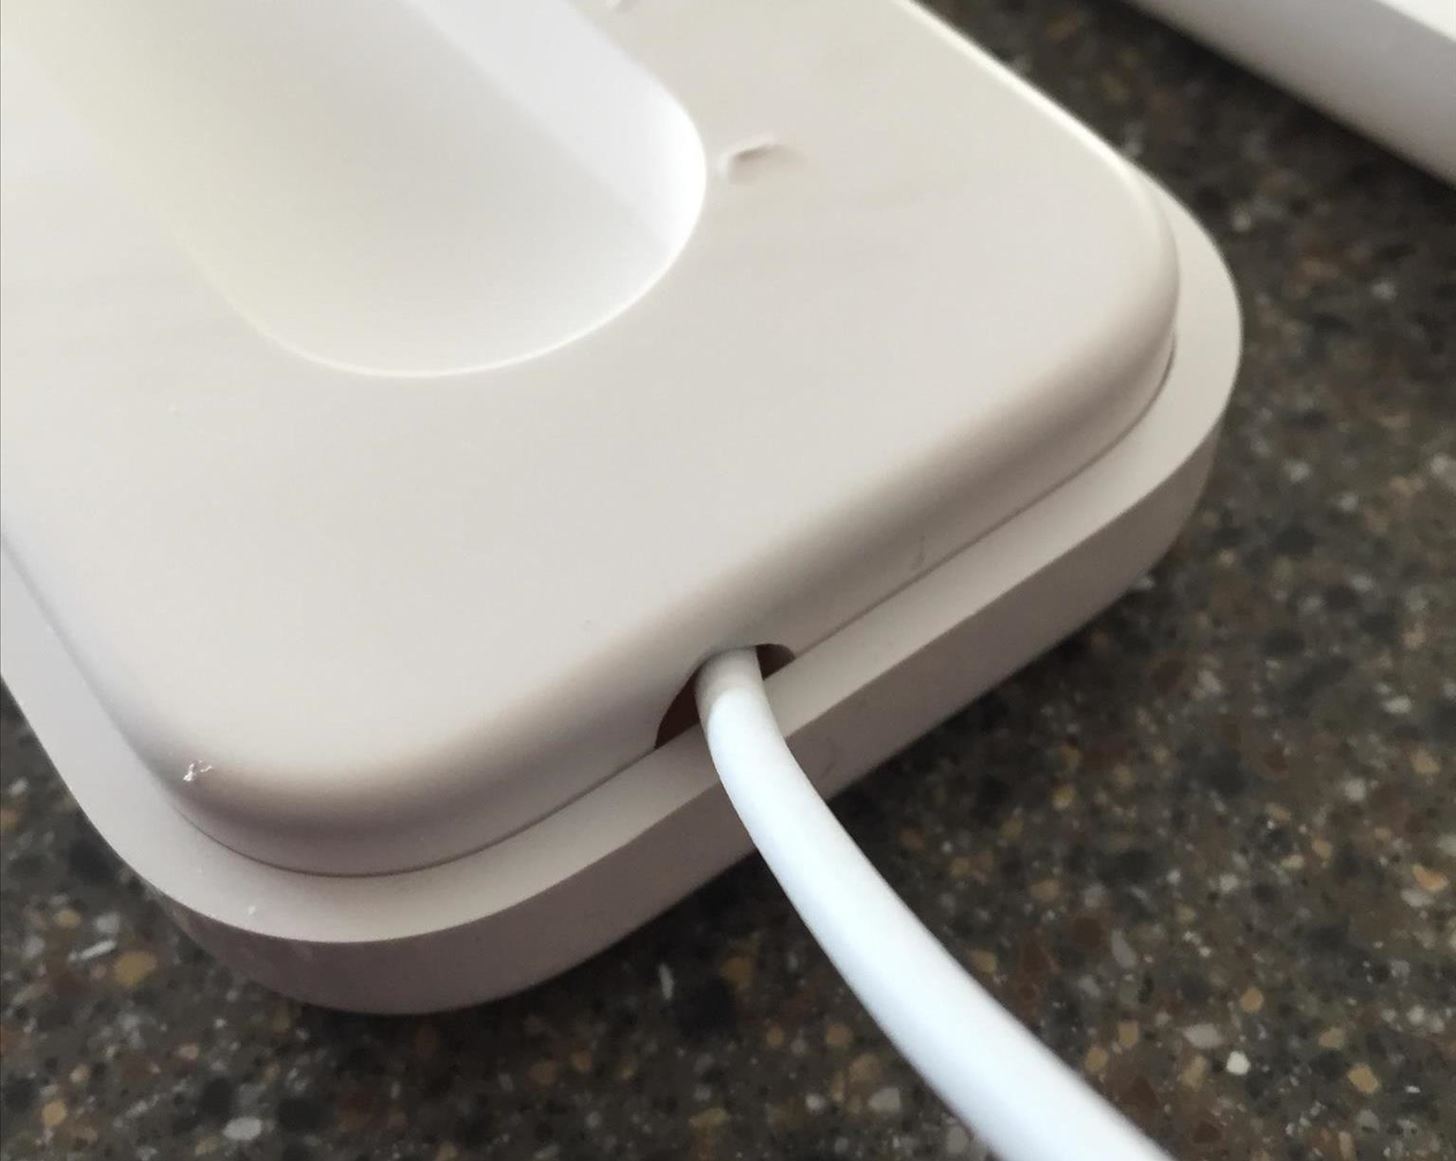 How to Turn Your Apple Watch Case into a Charging Dock